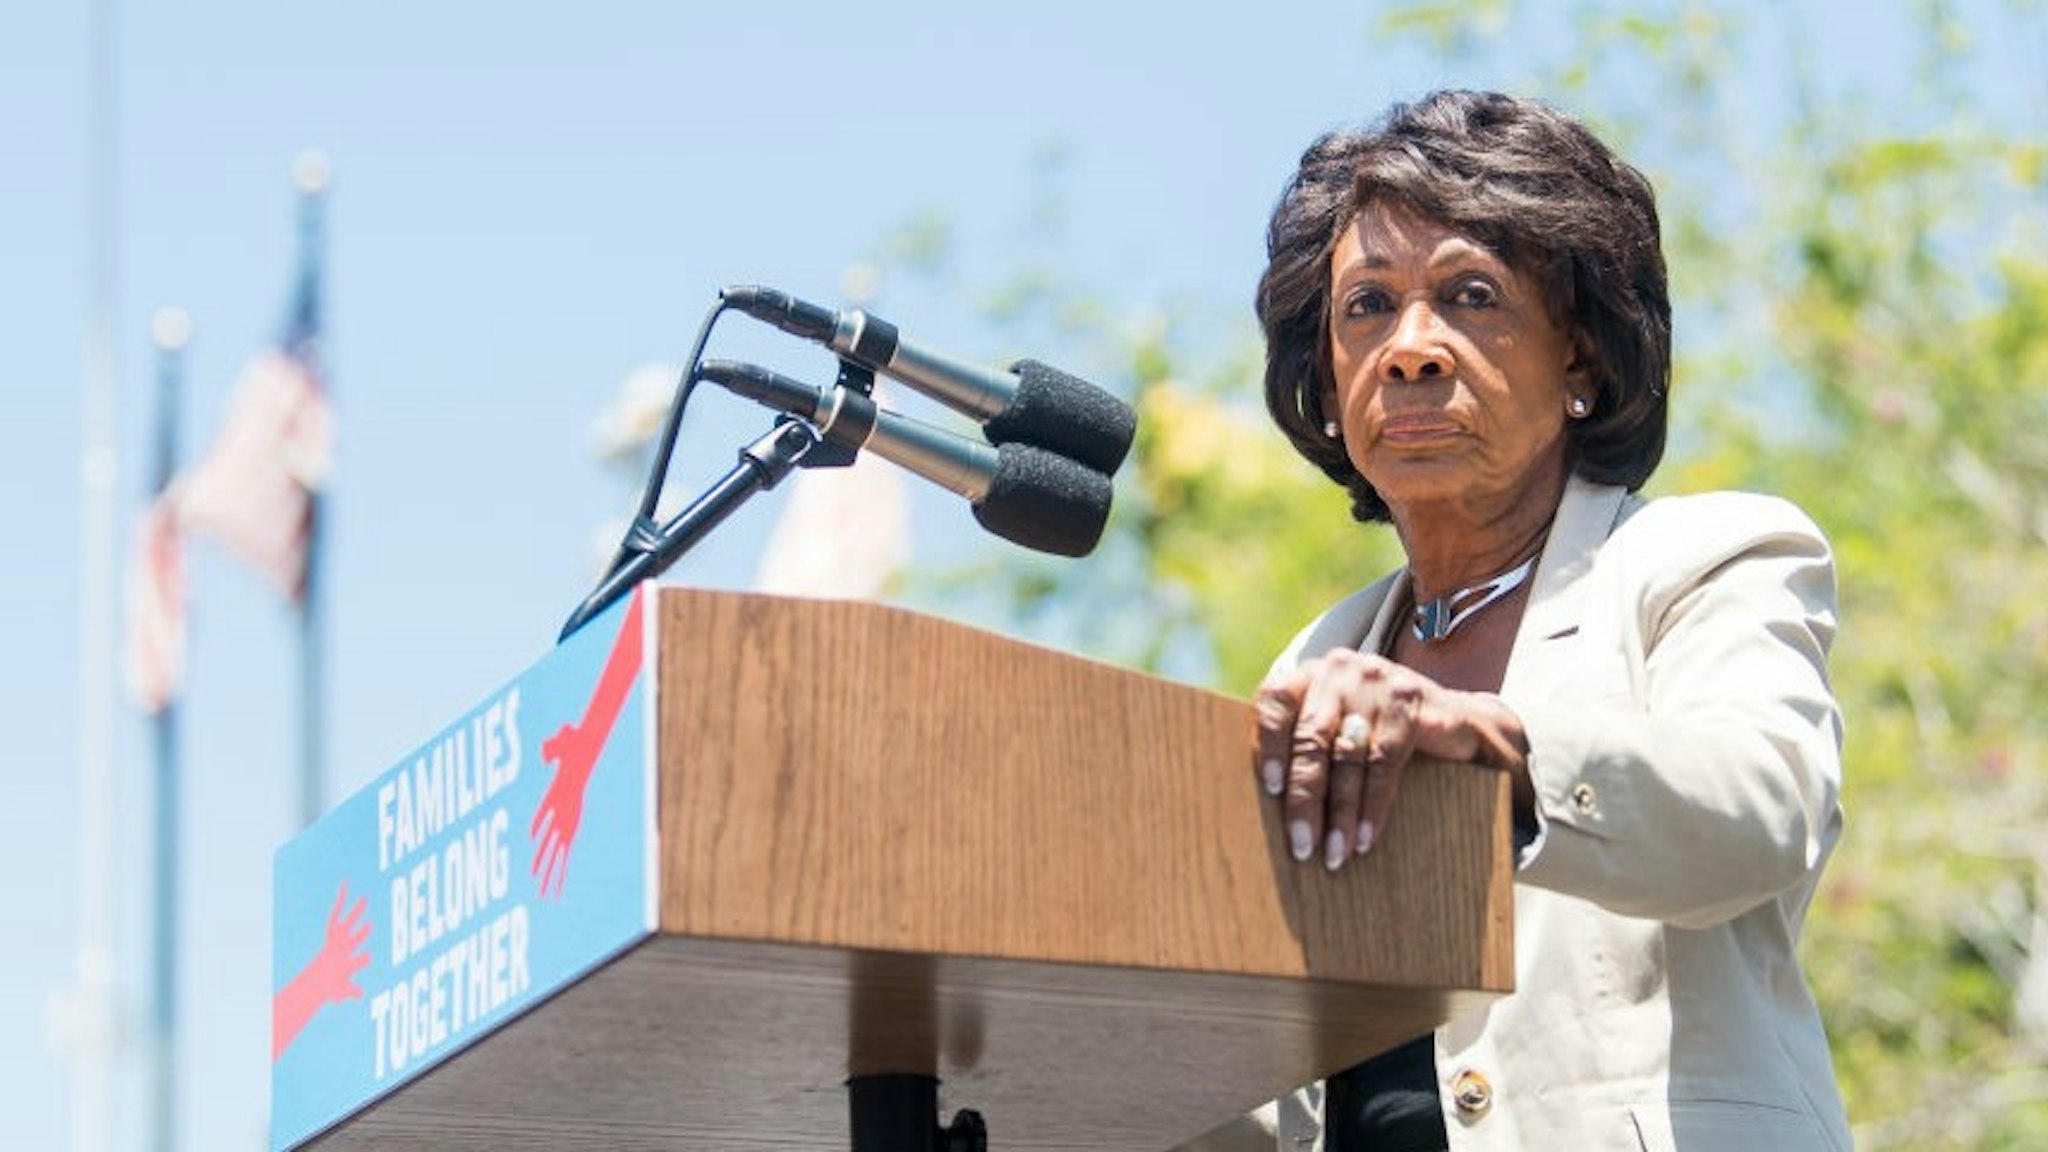 LOS ANGELES, CA - JUNE 30: Maxine Waters speaks onstage at 'Families Belong Together - Freedom for Immigrants March Los Angeles' at Los Angeles City Hall on June 30, 2018 in Los Angeles, California. (Photo by